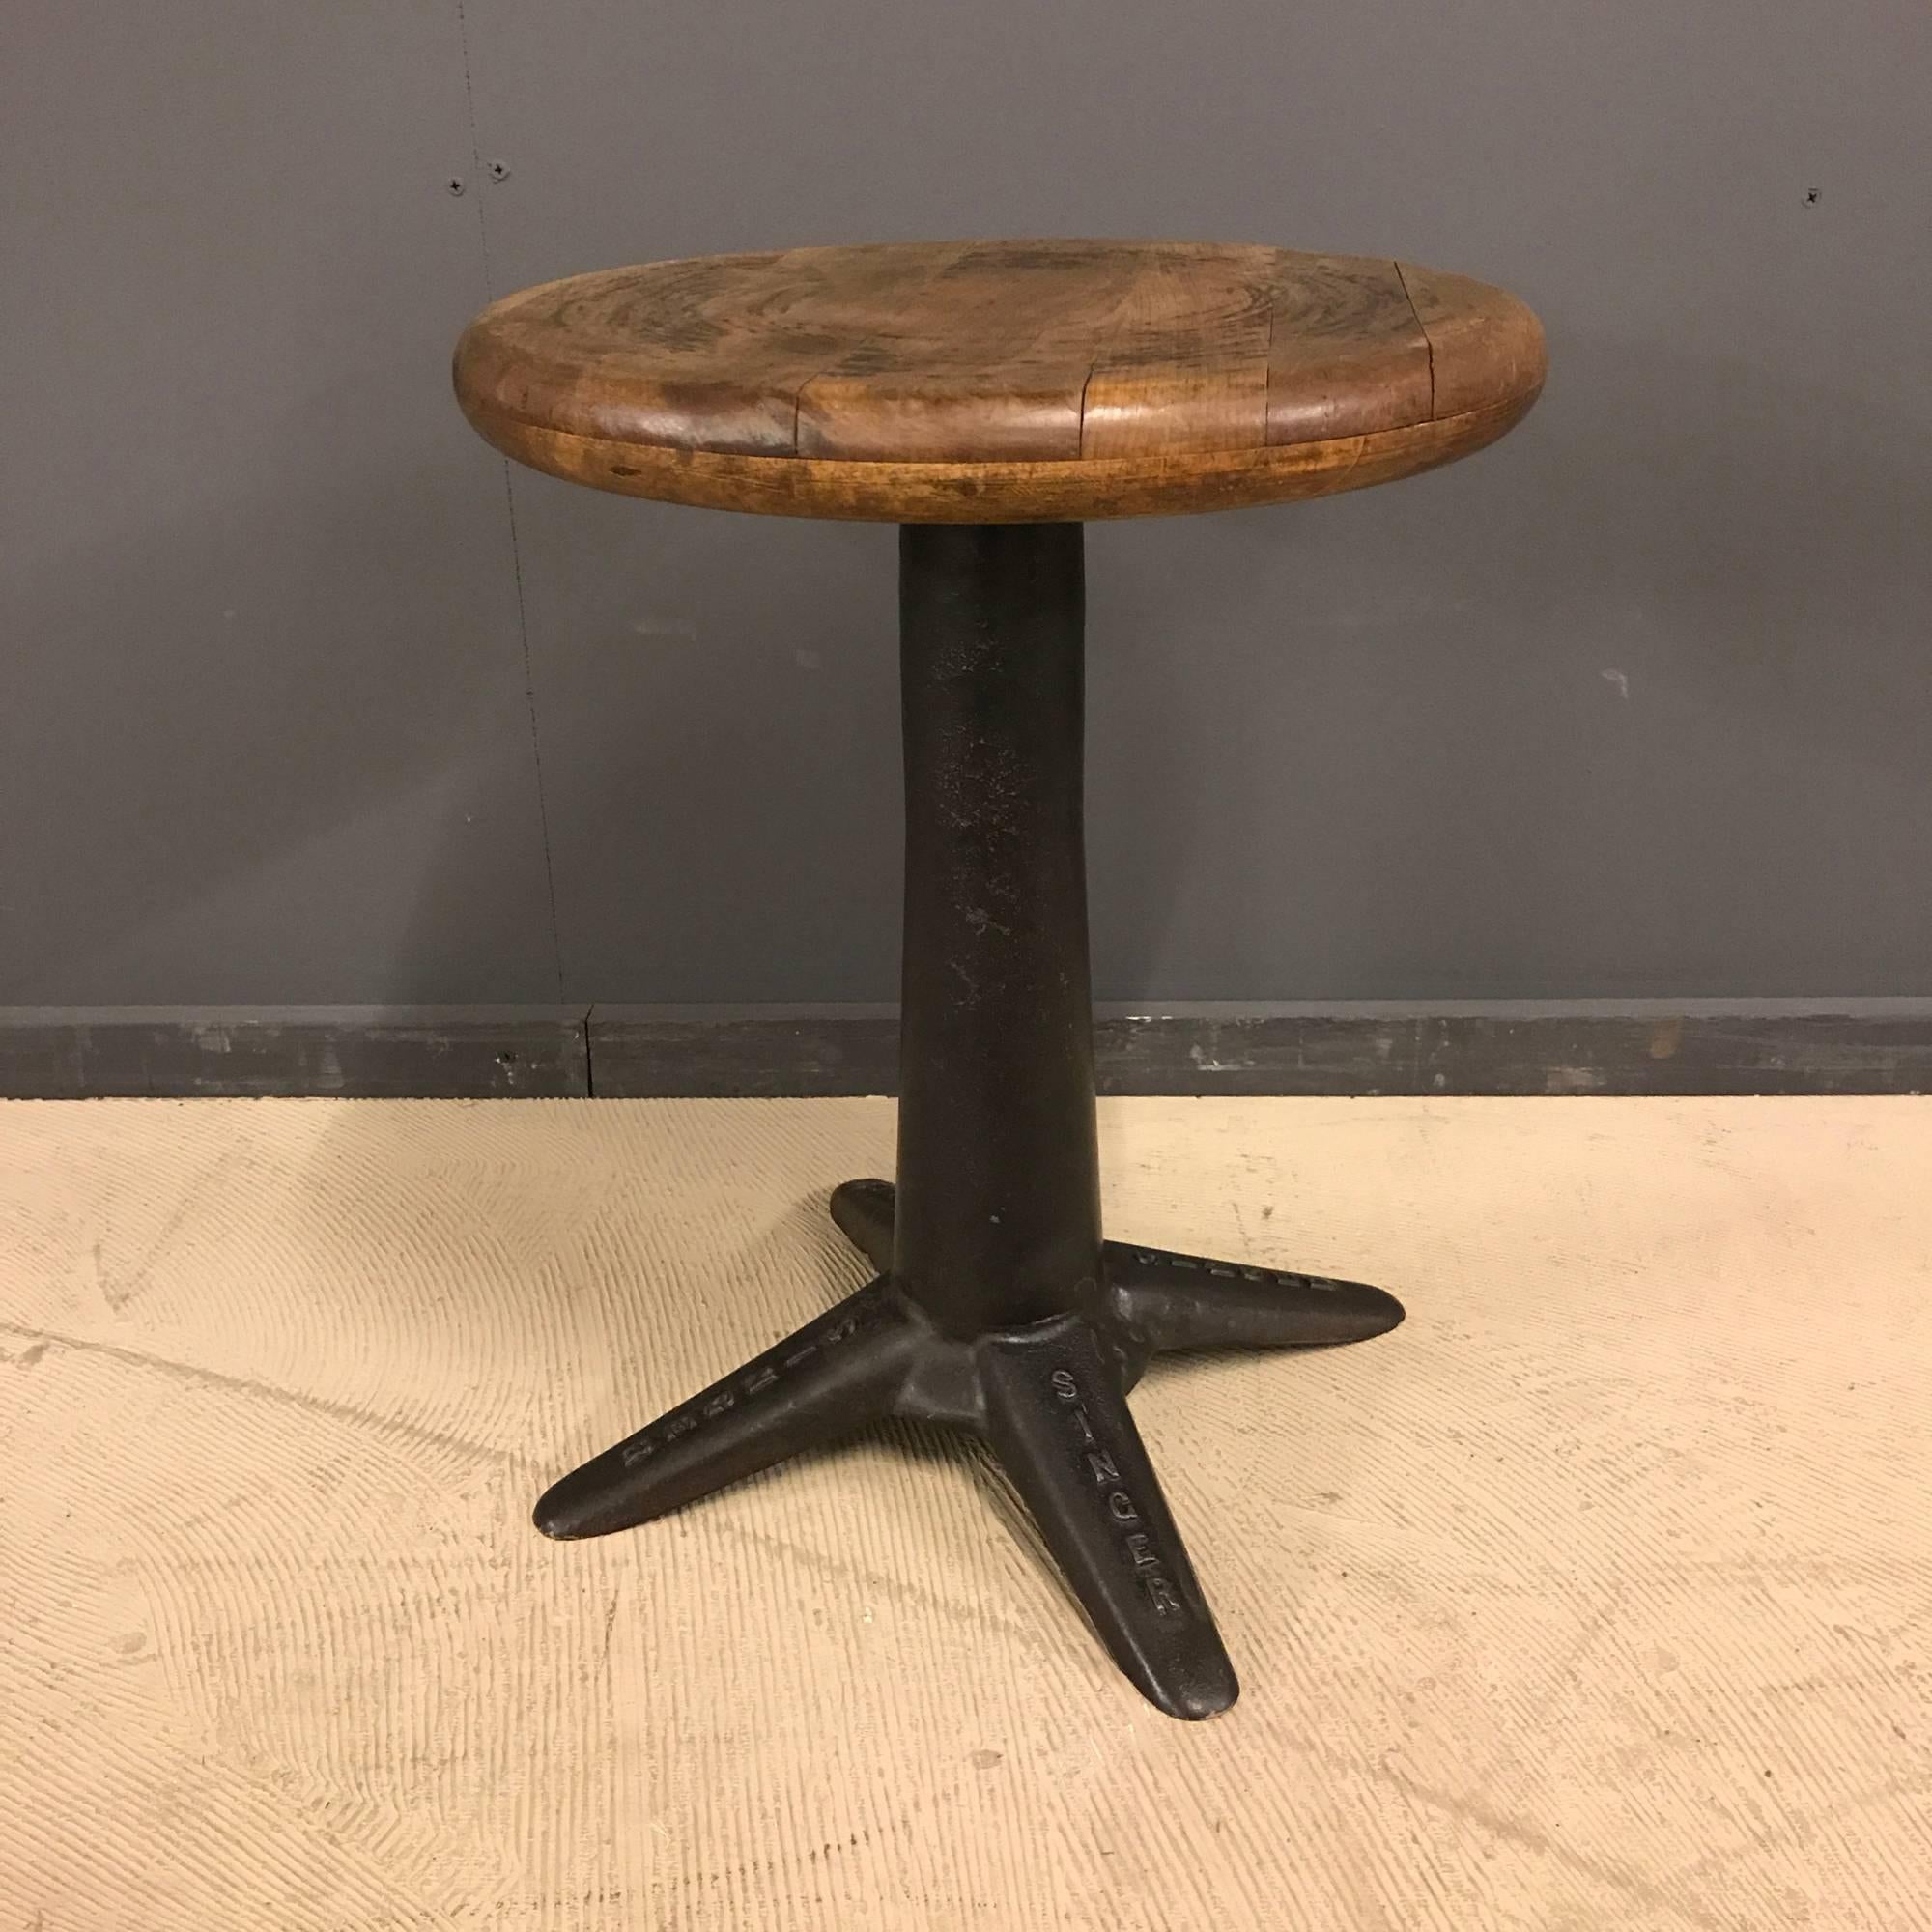 Industrial workshop stool by Singer. Heavy cast iron base with solid oak top. Made in France during the 1930s. This stool remains in good condition.